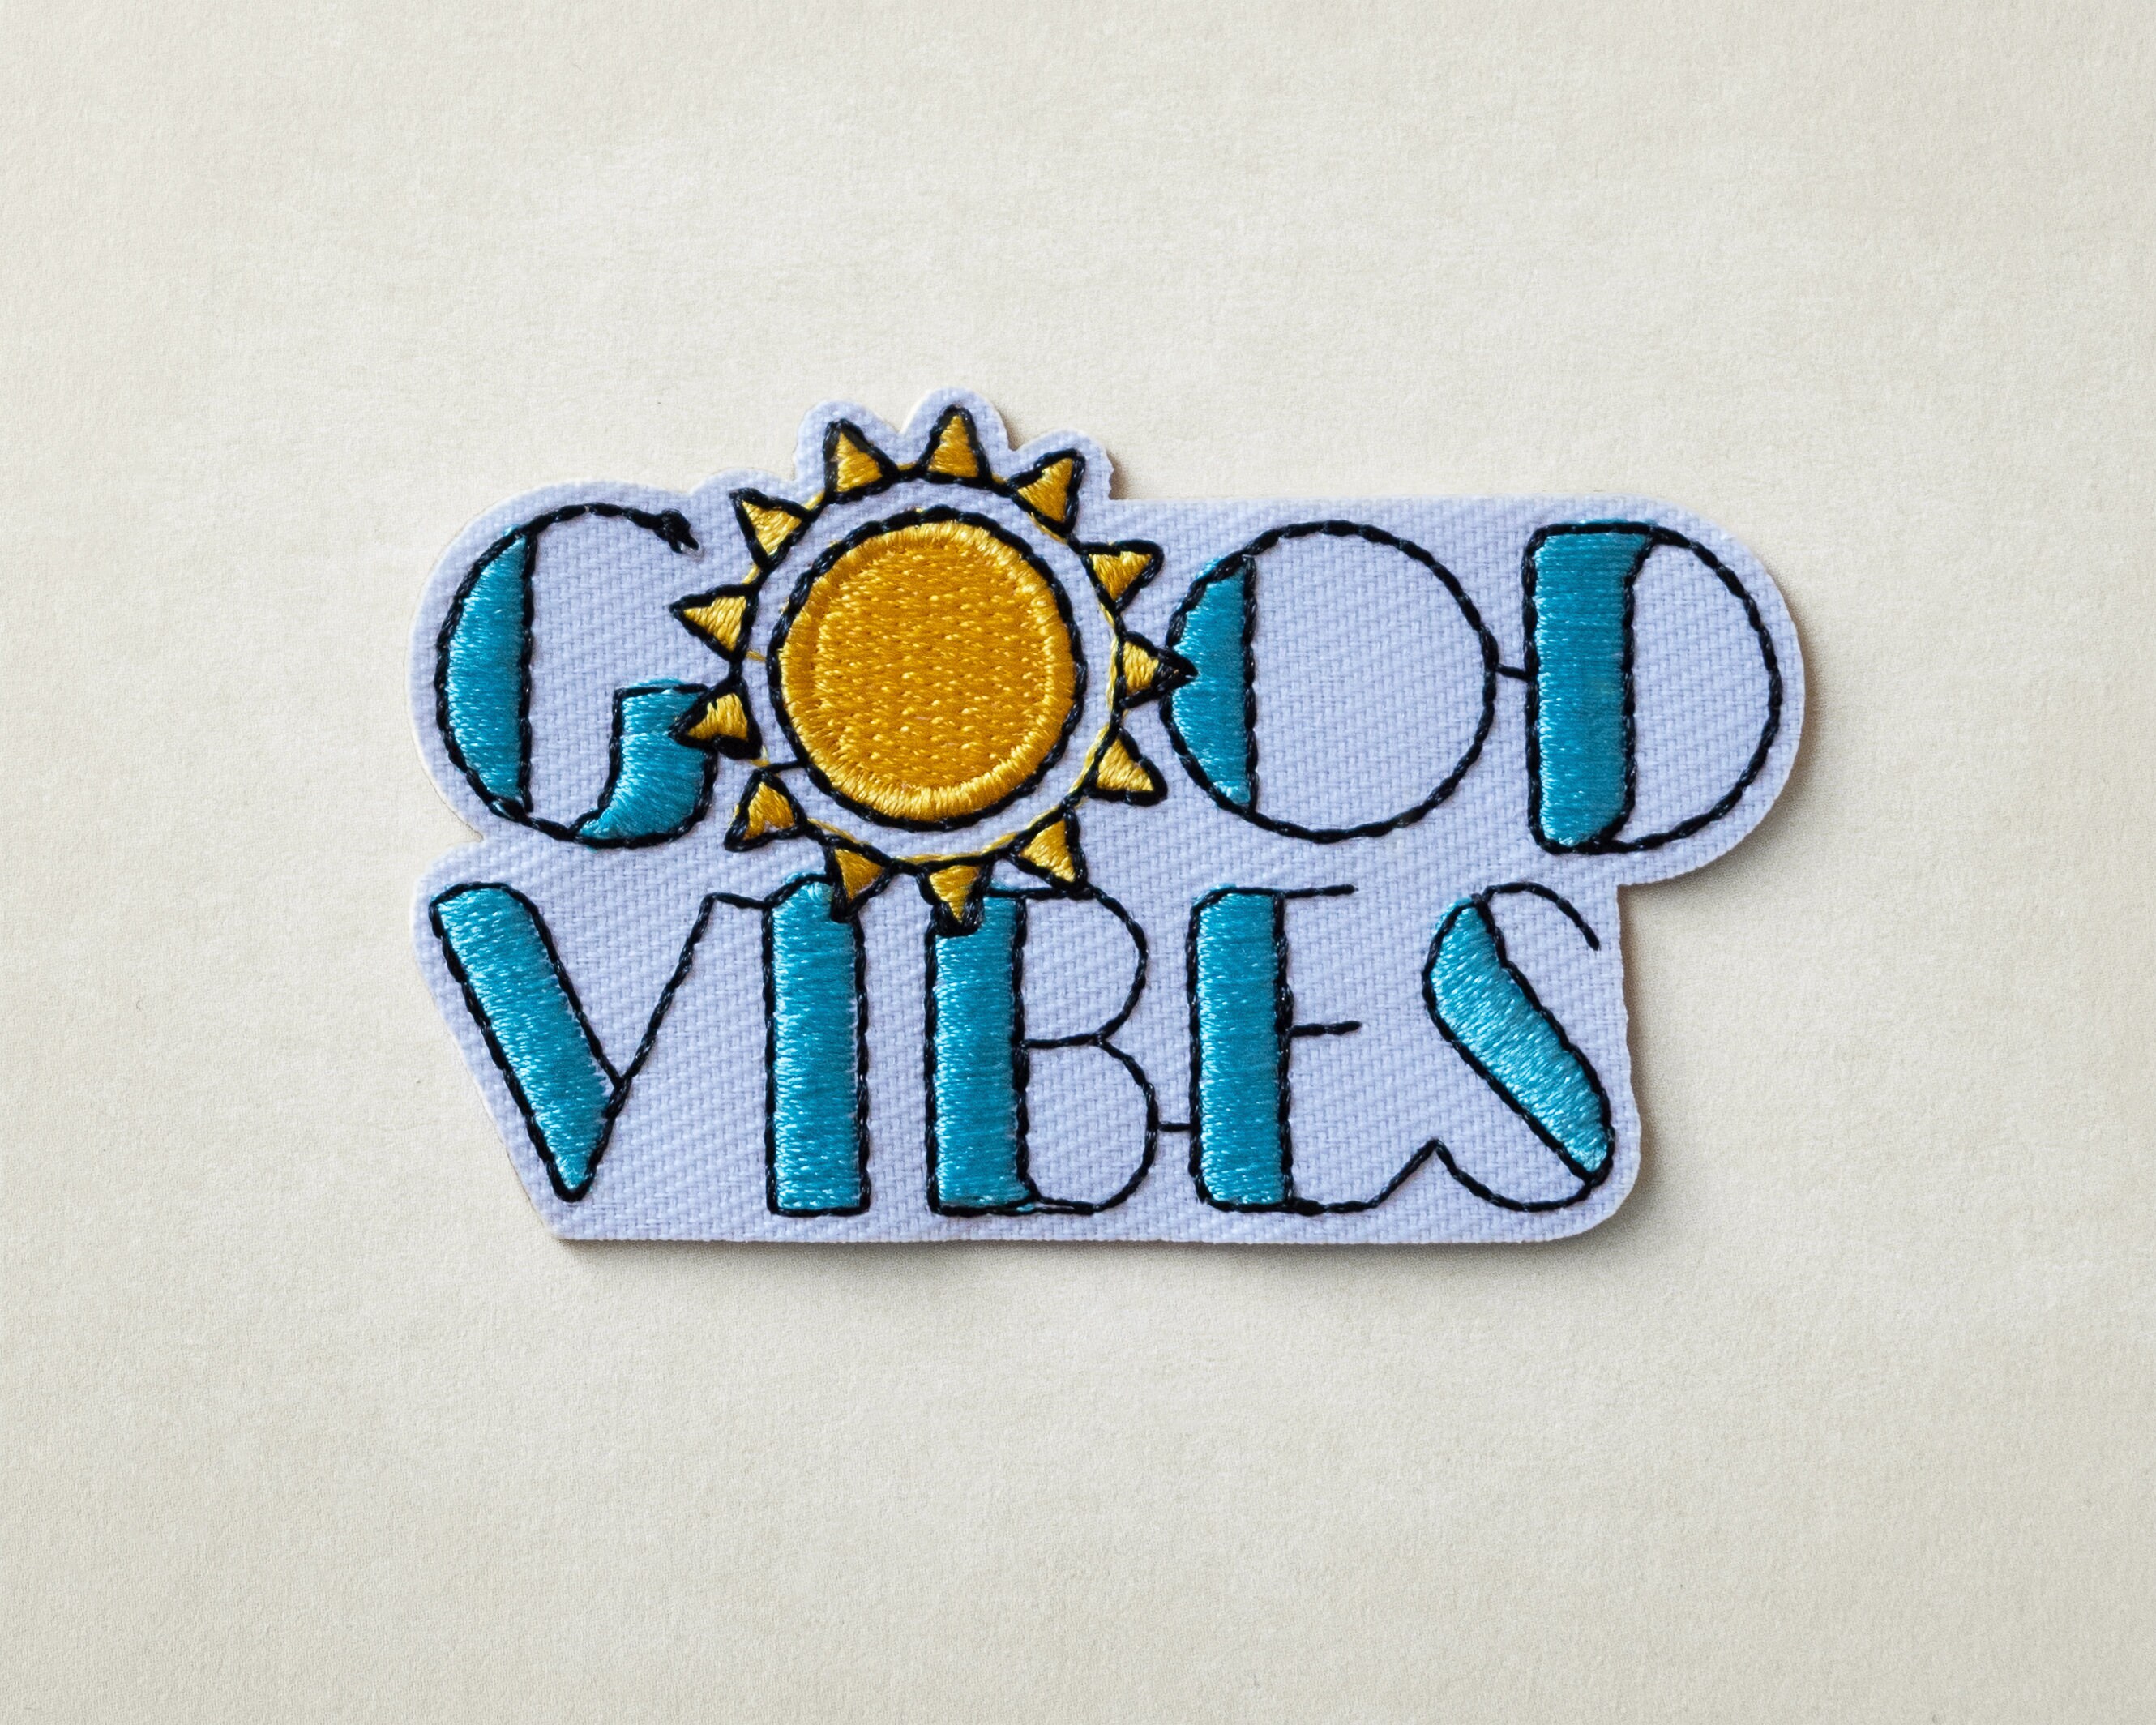 Holidays Summer Patch: Embroidered Iron Patch / Applique Iron Iron